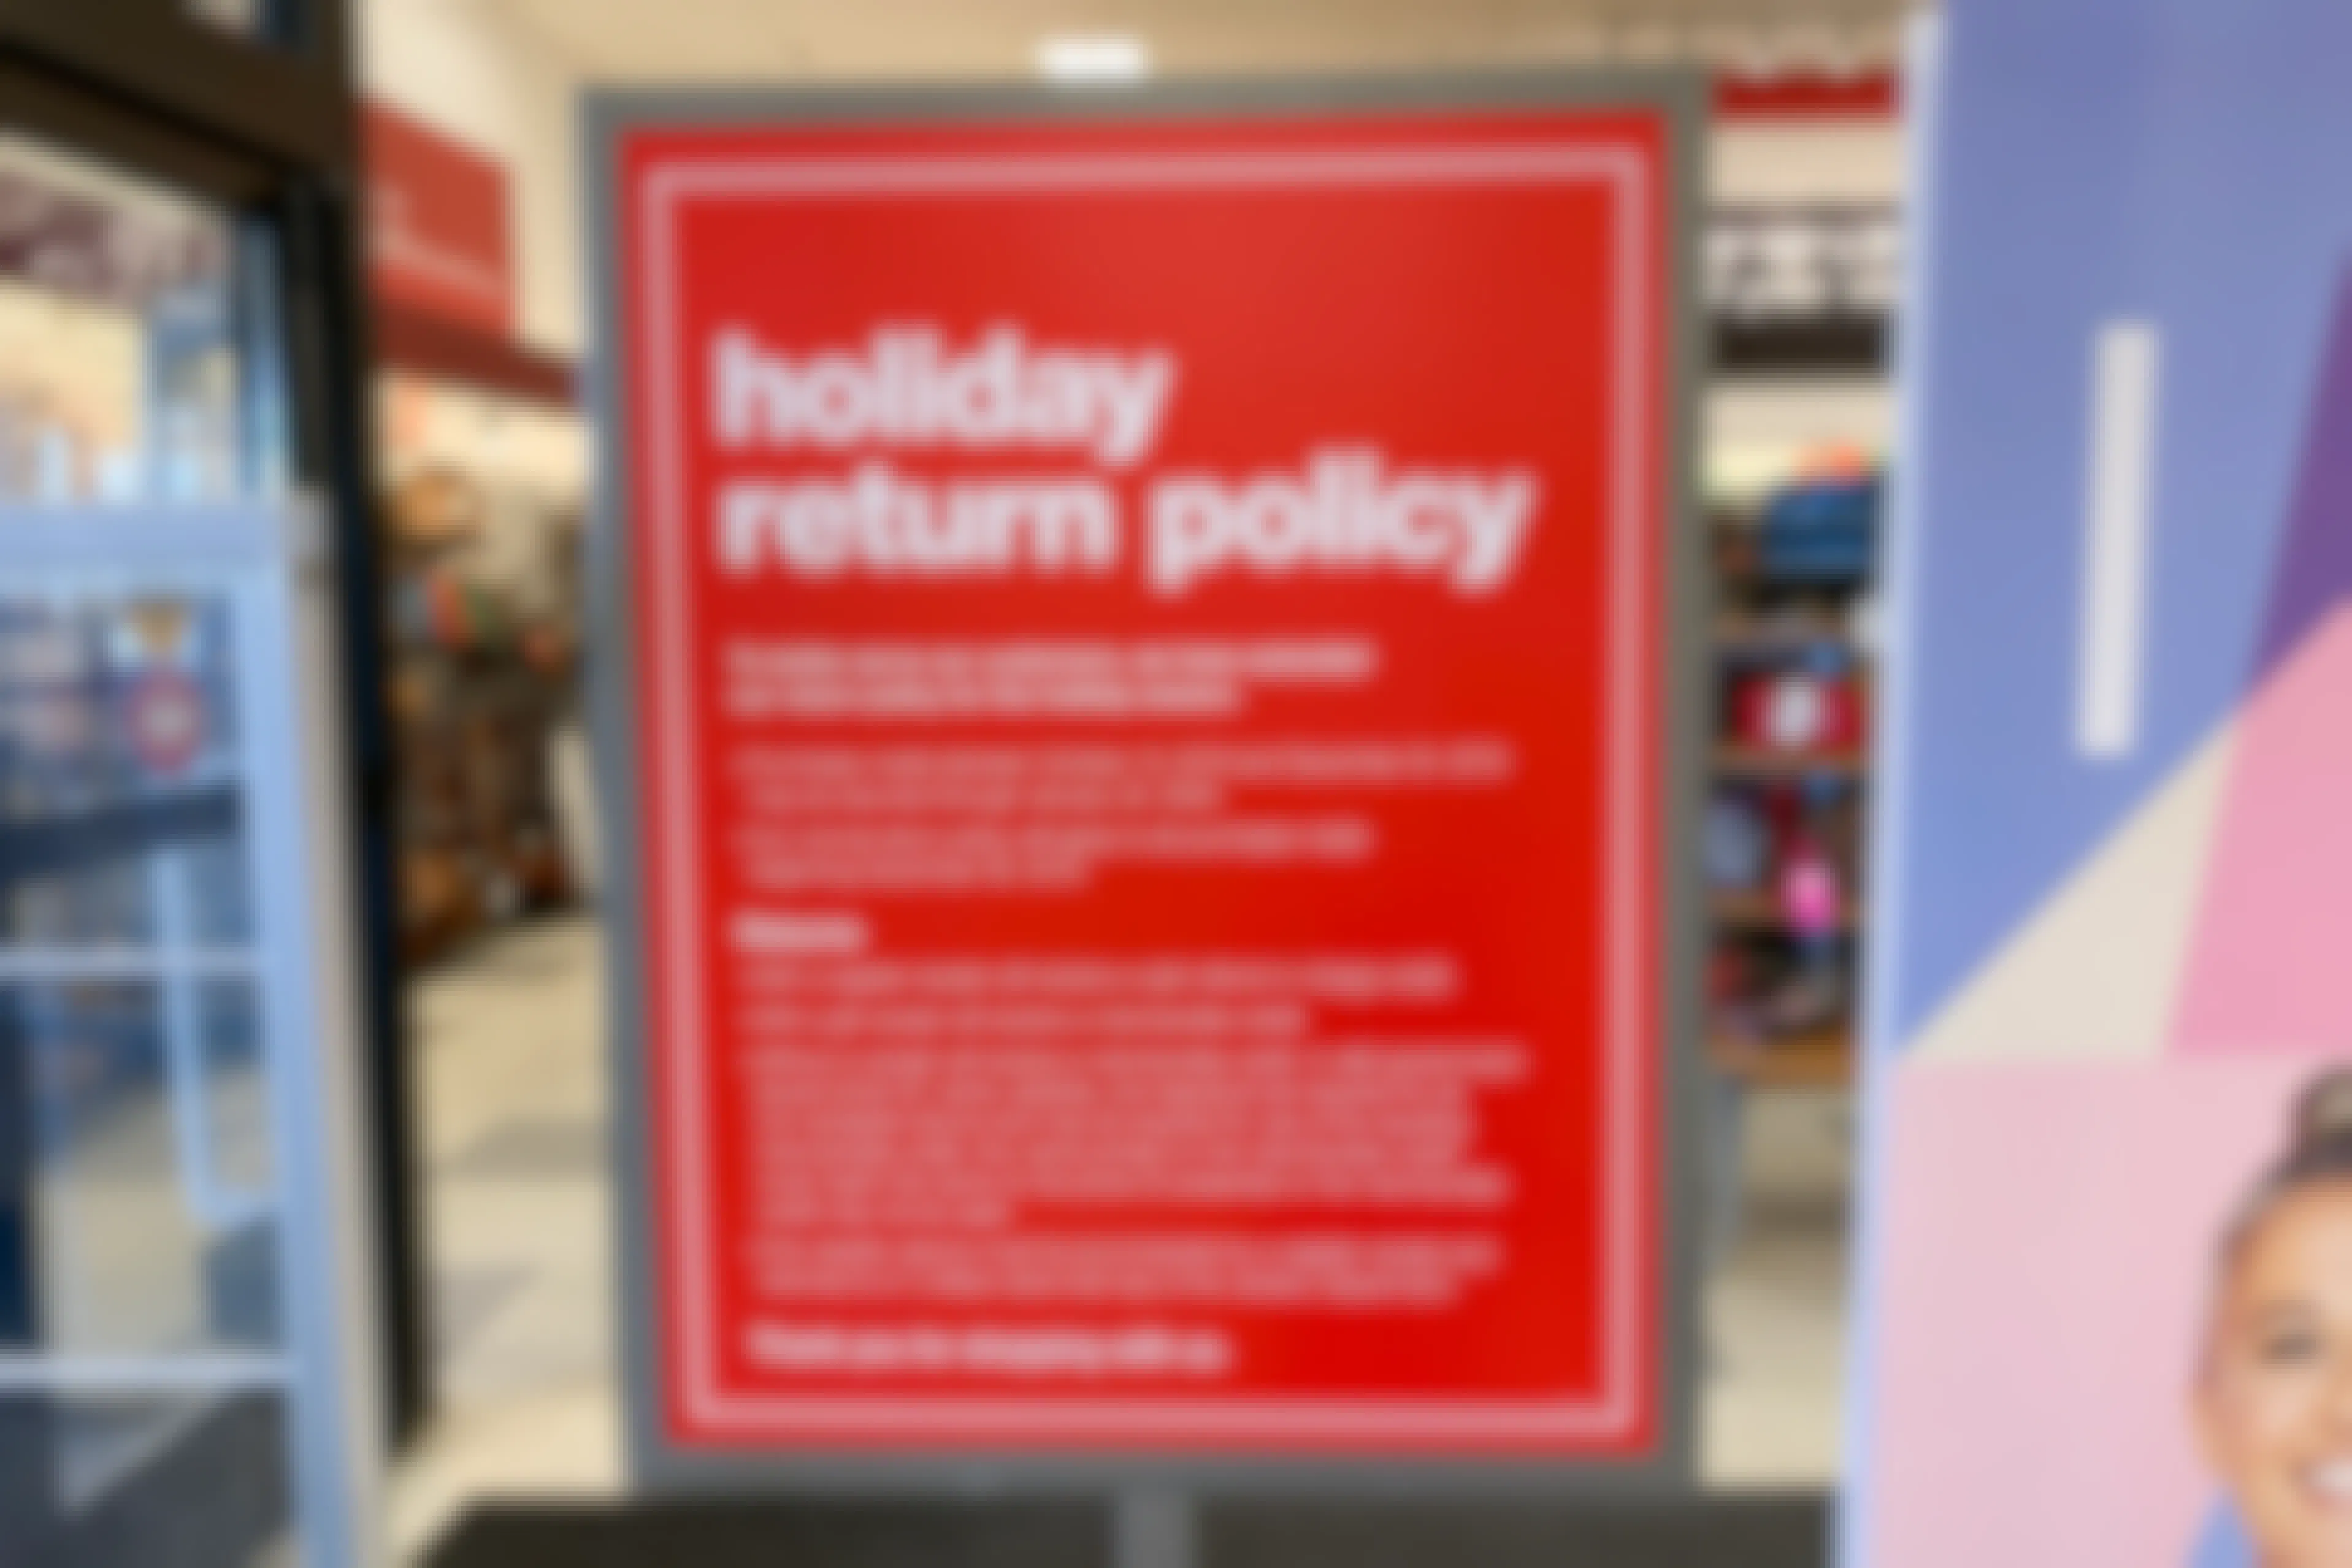 The holiday T.J.Maxx return policy sign at the front entrance.